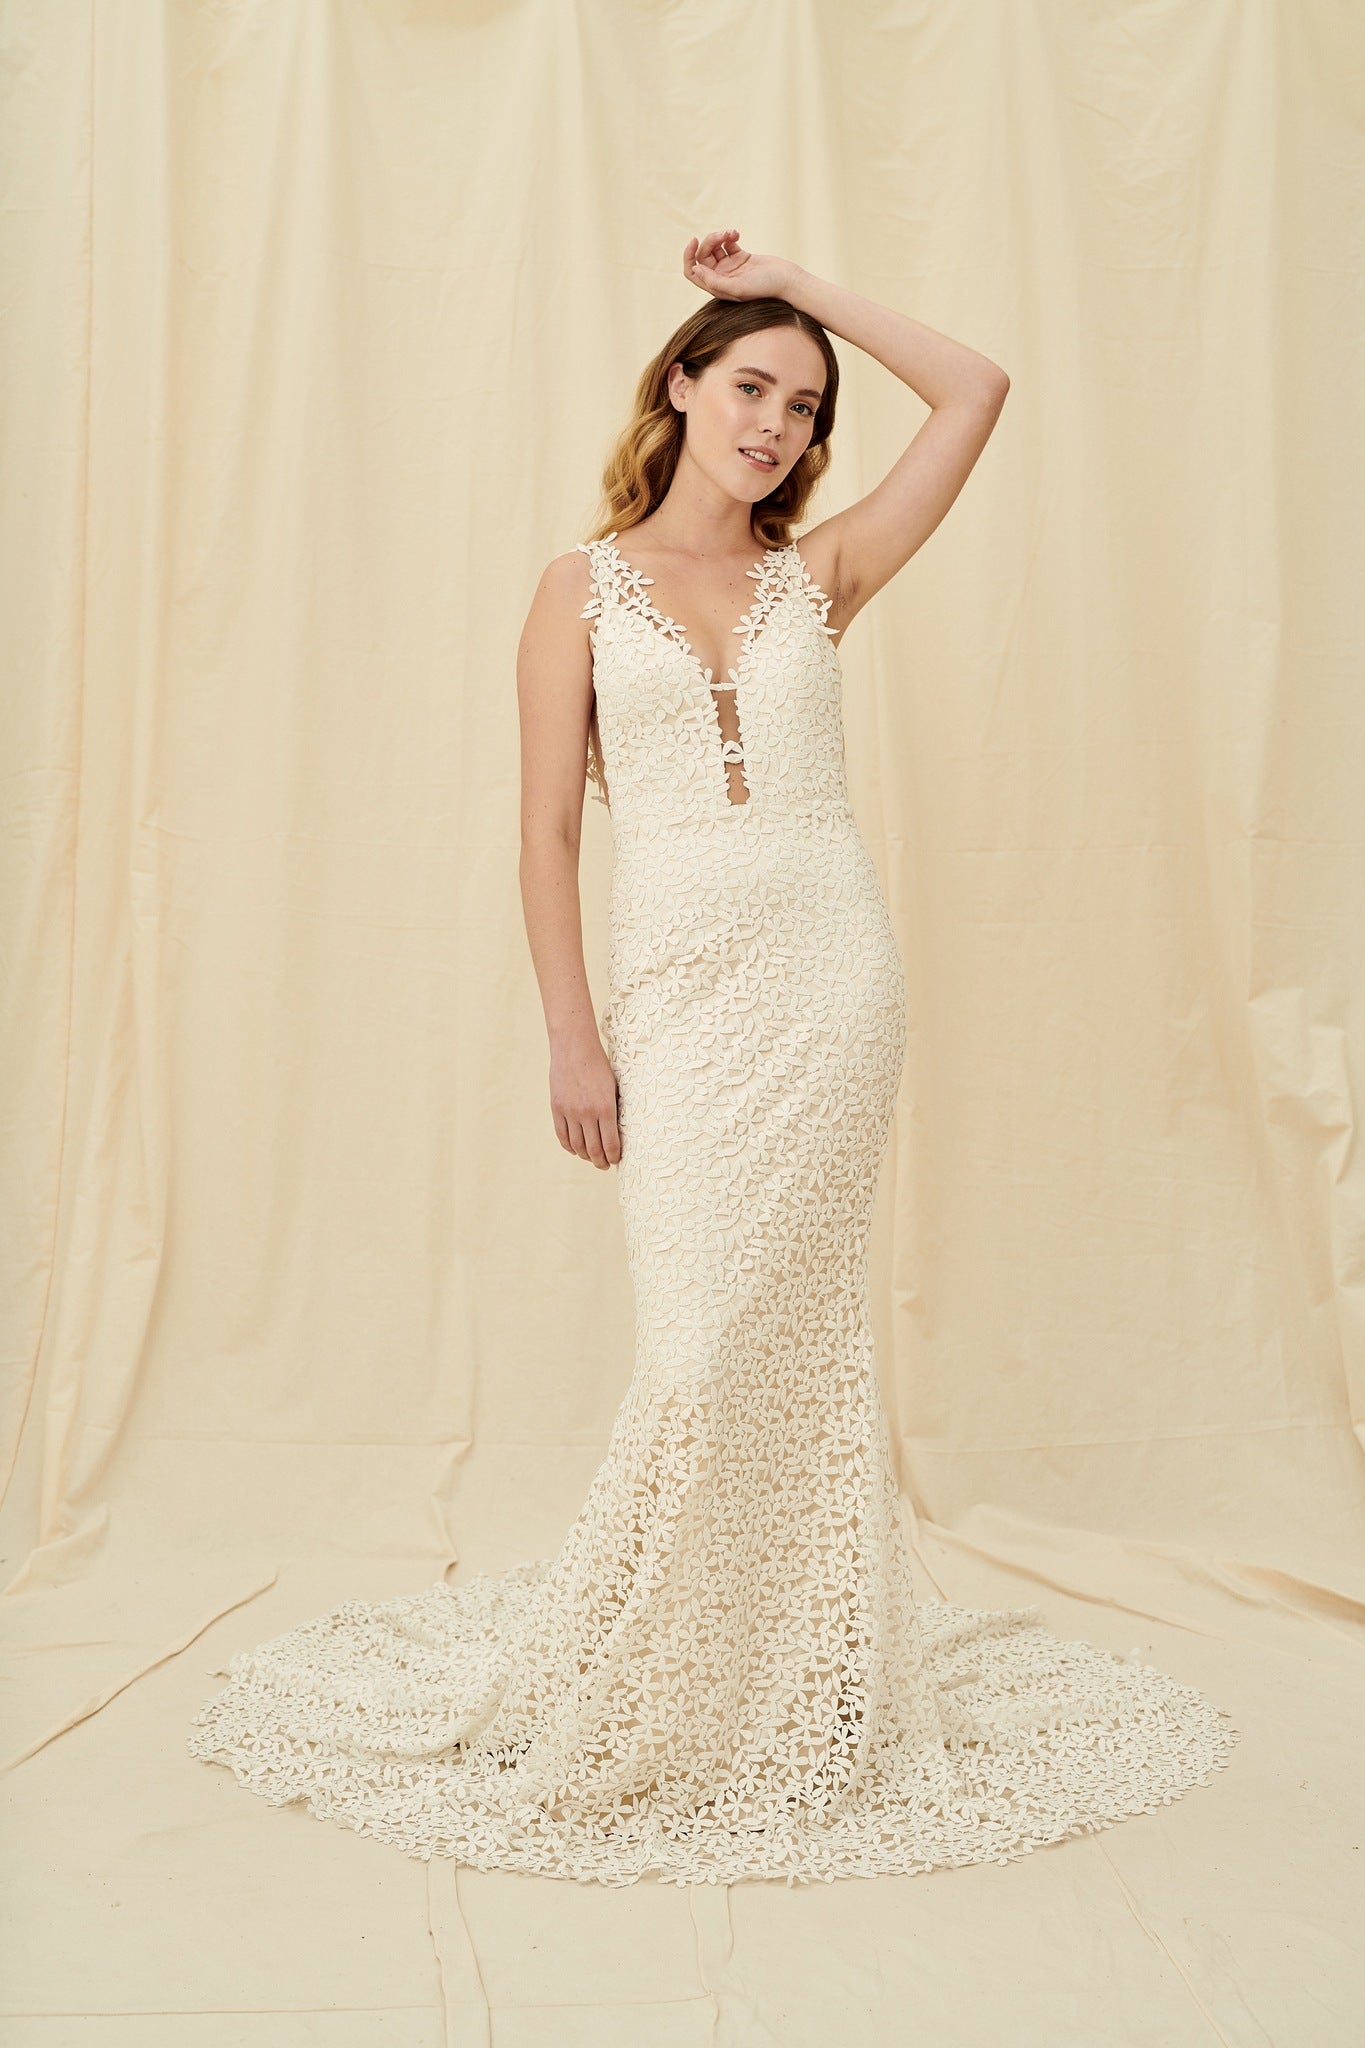 Mermaid wedding dress with all-over flower lace, a dramatic train, and a low back